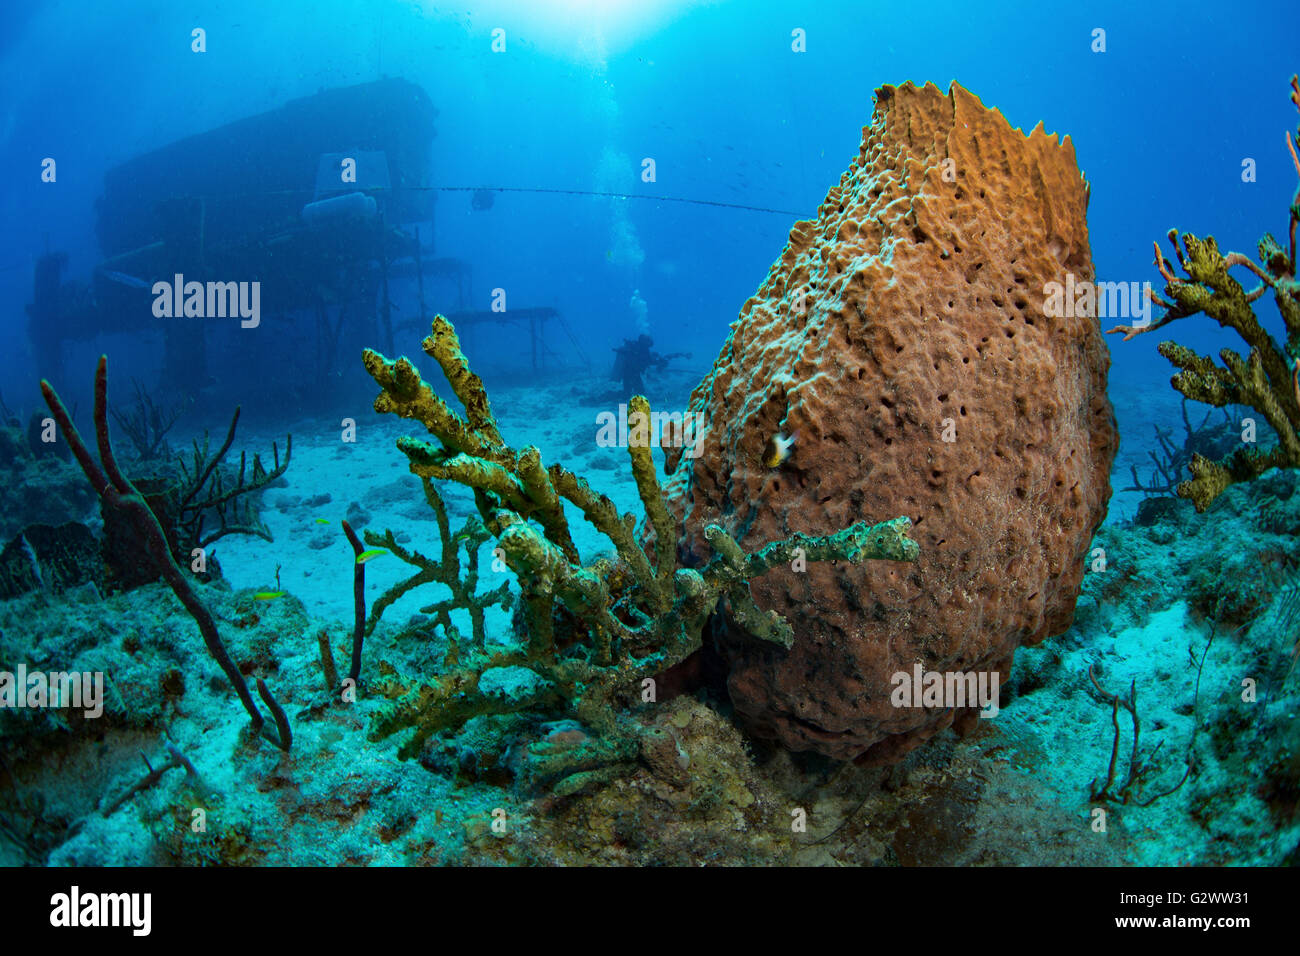 Mysteries of the undersea world are explored at the Aquarius Reef Base, seen in the background of this underwater scene. Stock Photo